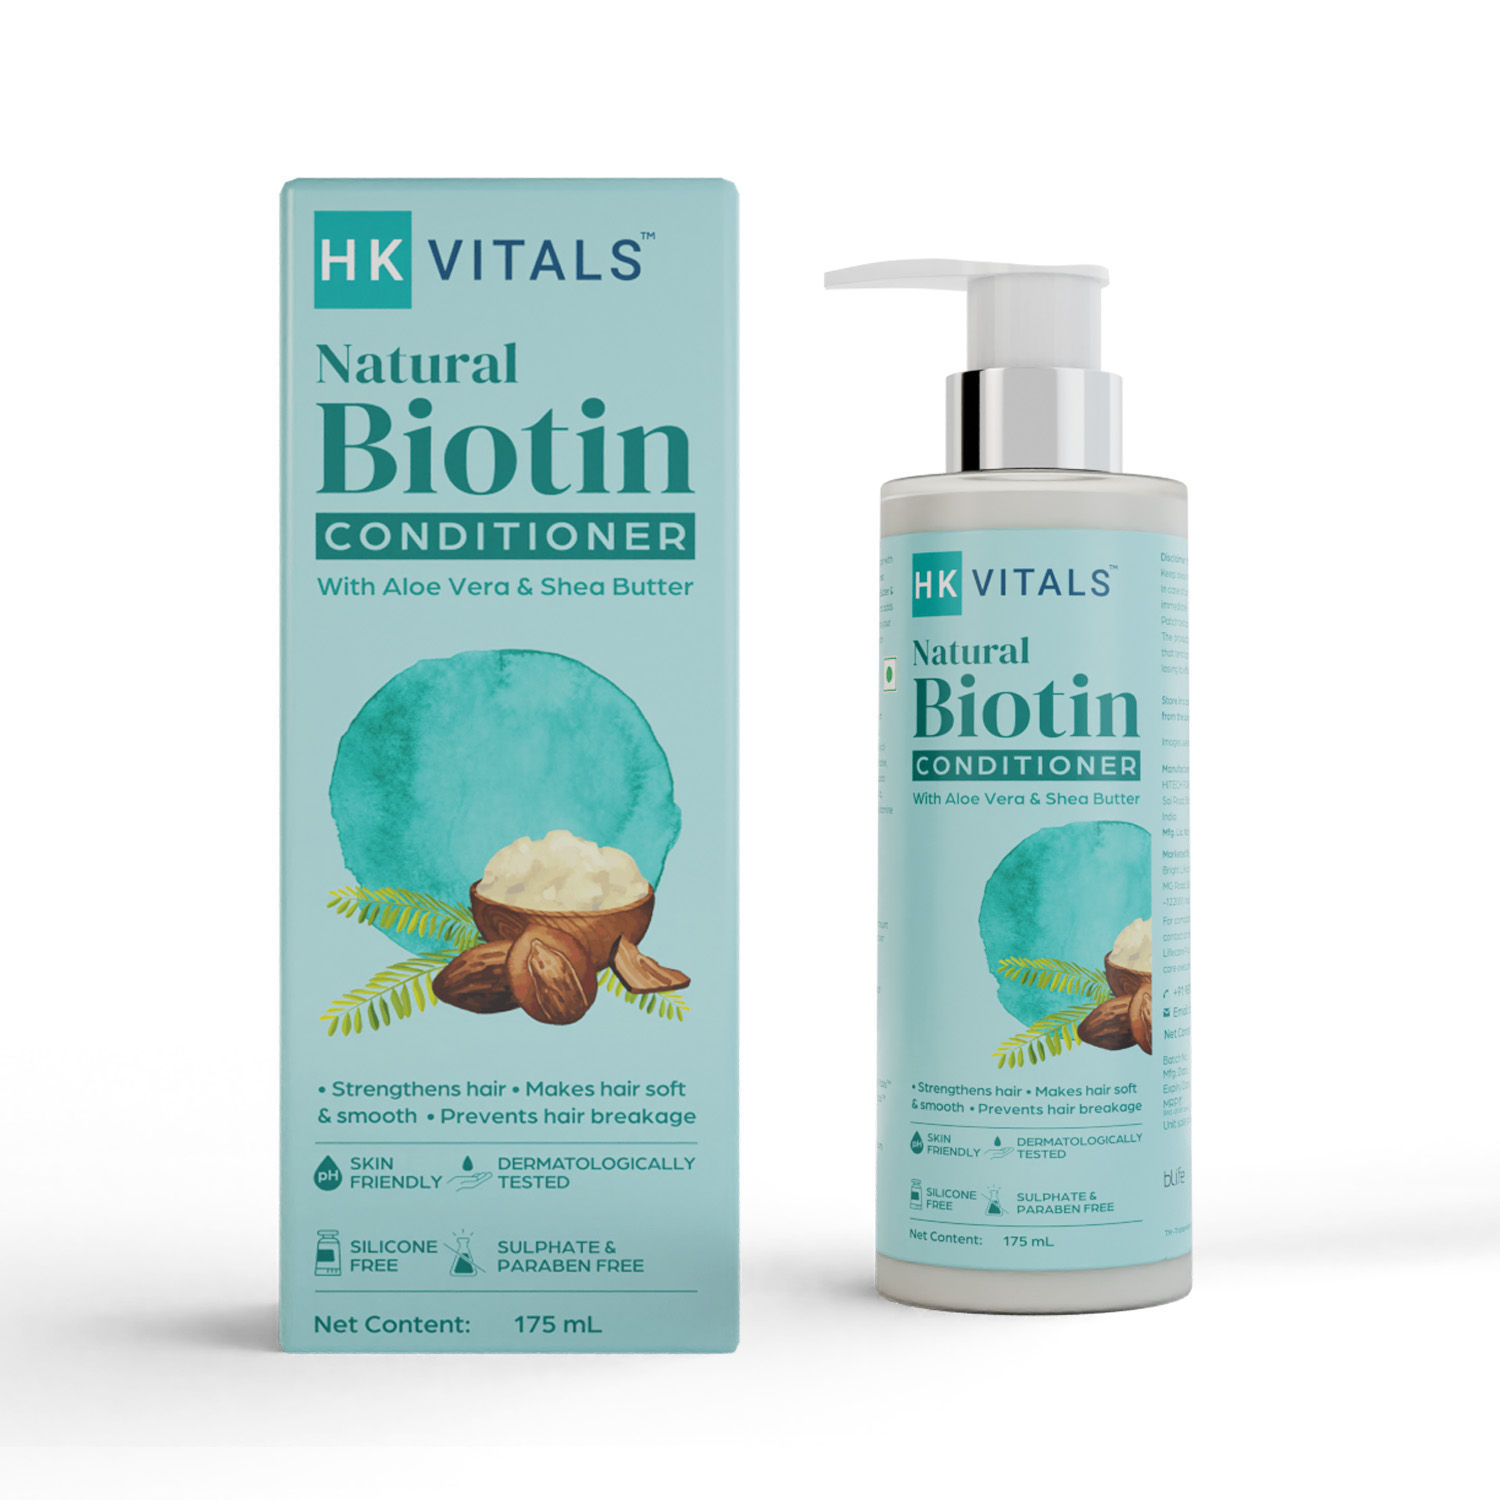 HK VITALS by HealthKart Biotin Conditioner with Aloe Vera & Shea Butter, All Hair Types